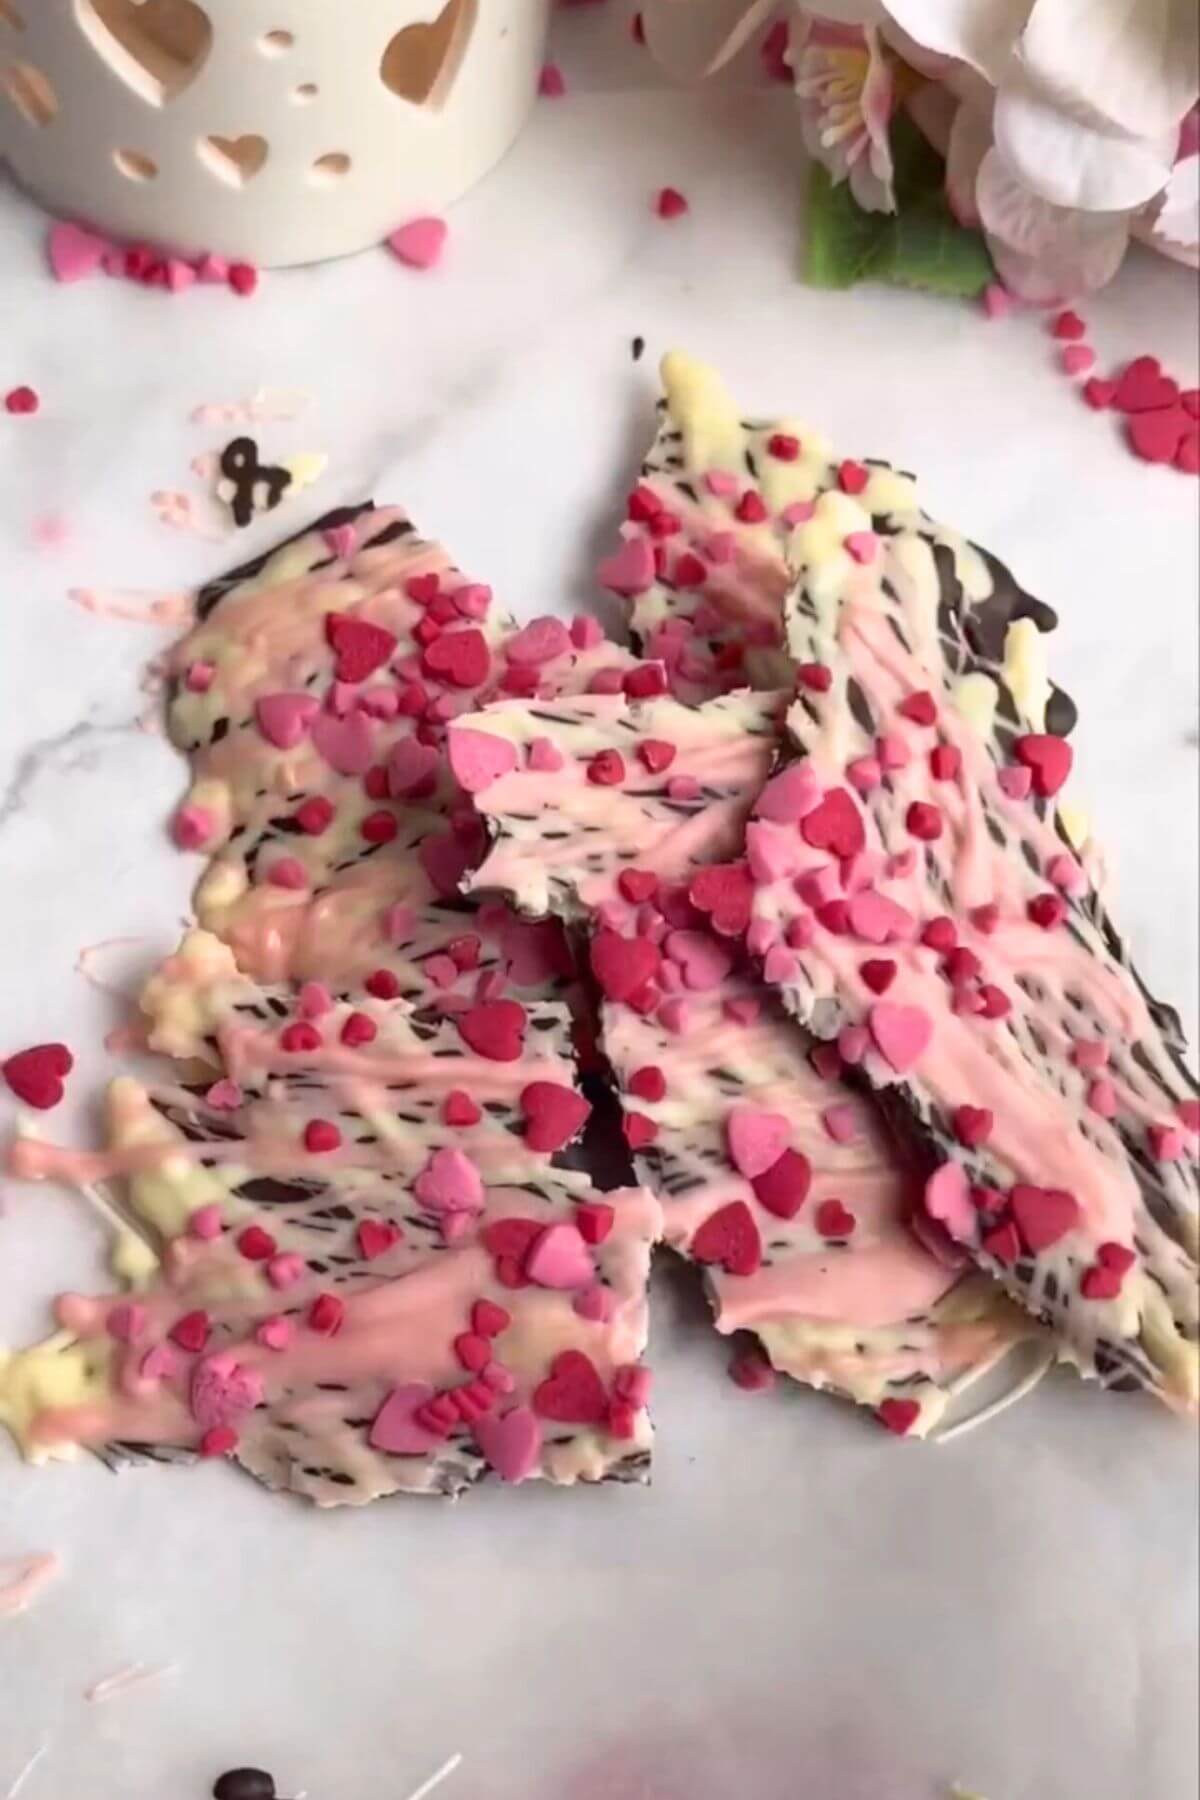 Chocolate bark made with dark, white and pink chocolate, decorated with heart shaped sprinkles.